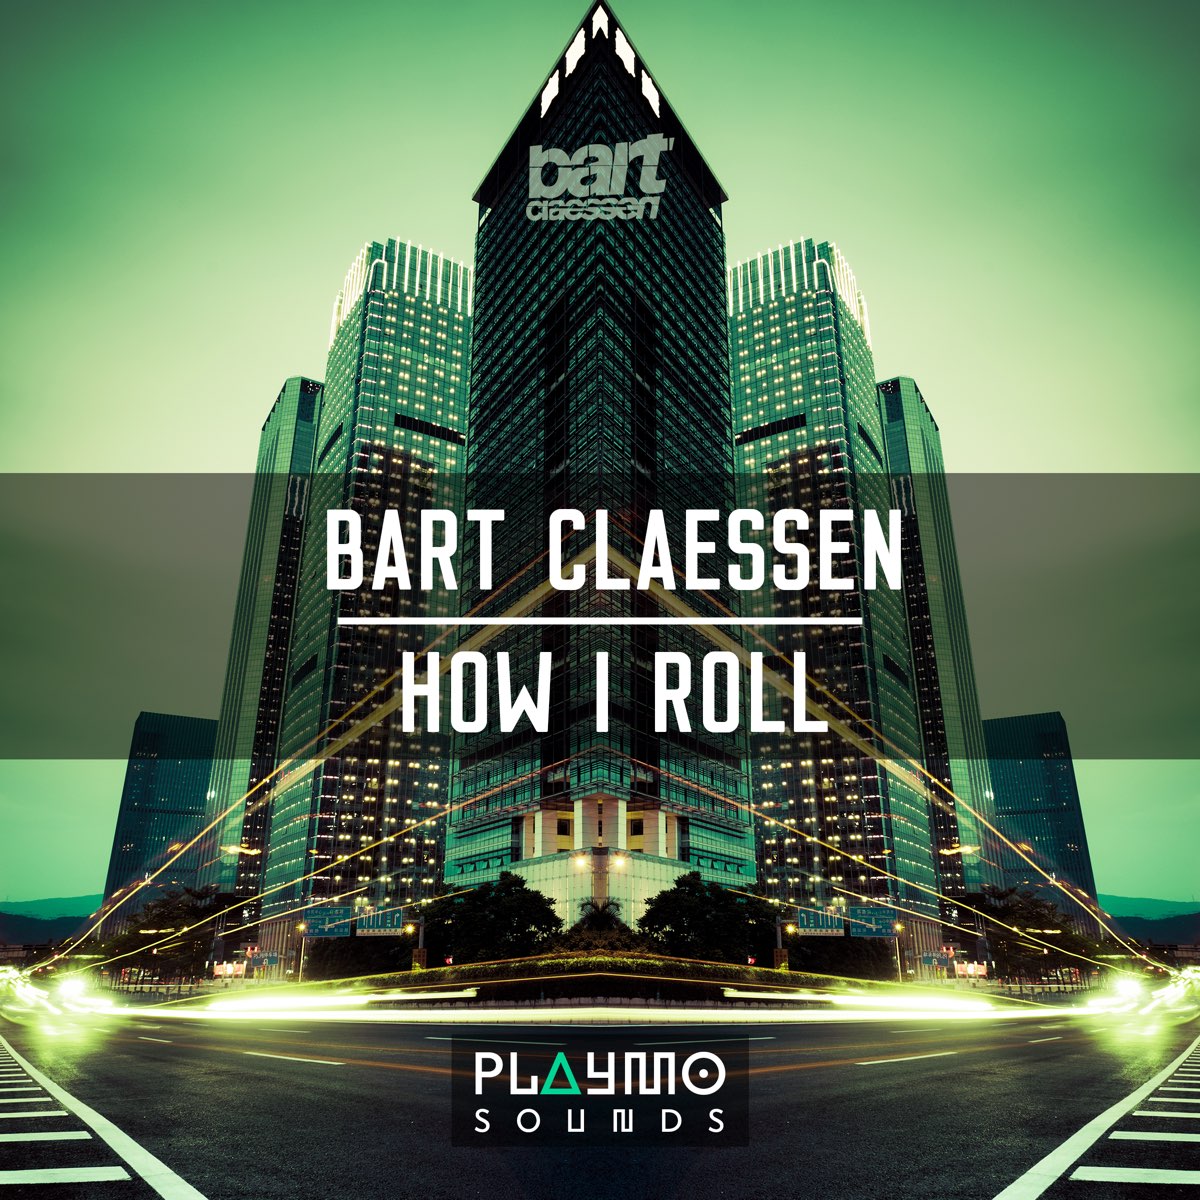 I roll. Bart Claessen - Playmo (1st Play). Roller Original Mix. Remo con - Cold Front (Bart Claessen Remix). Lets show these how we Roll.